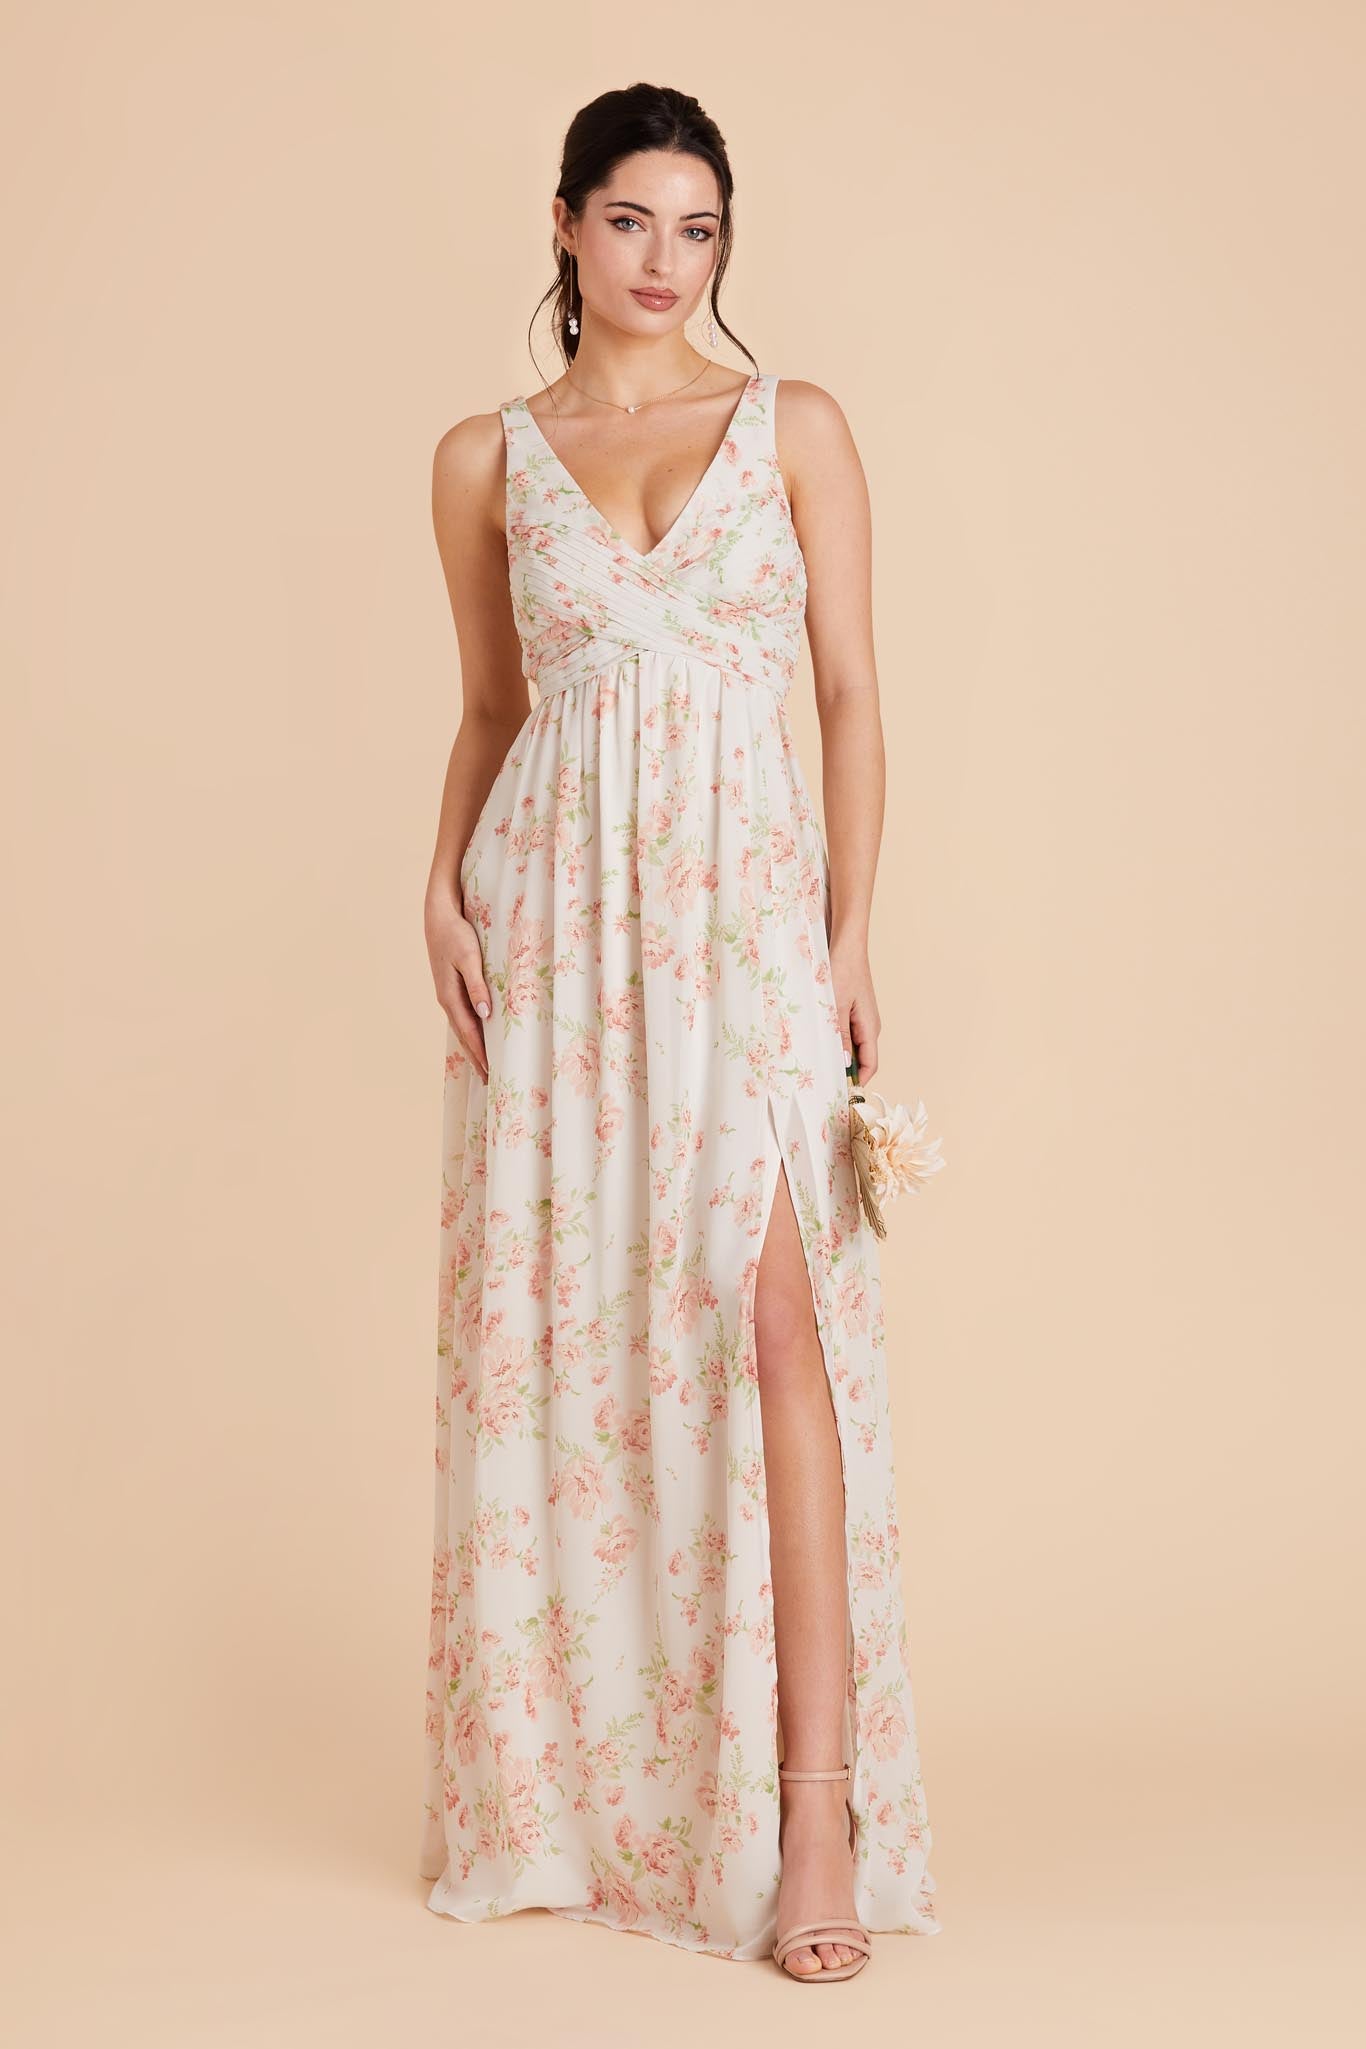 Whimsical Blooms Laurie Empire Dress by Birdy Grey